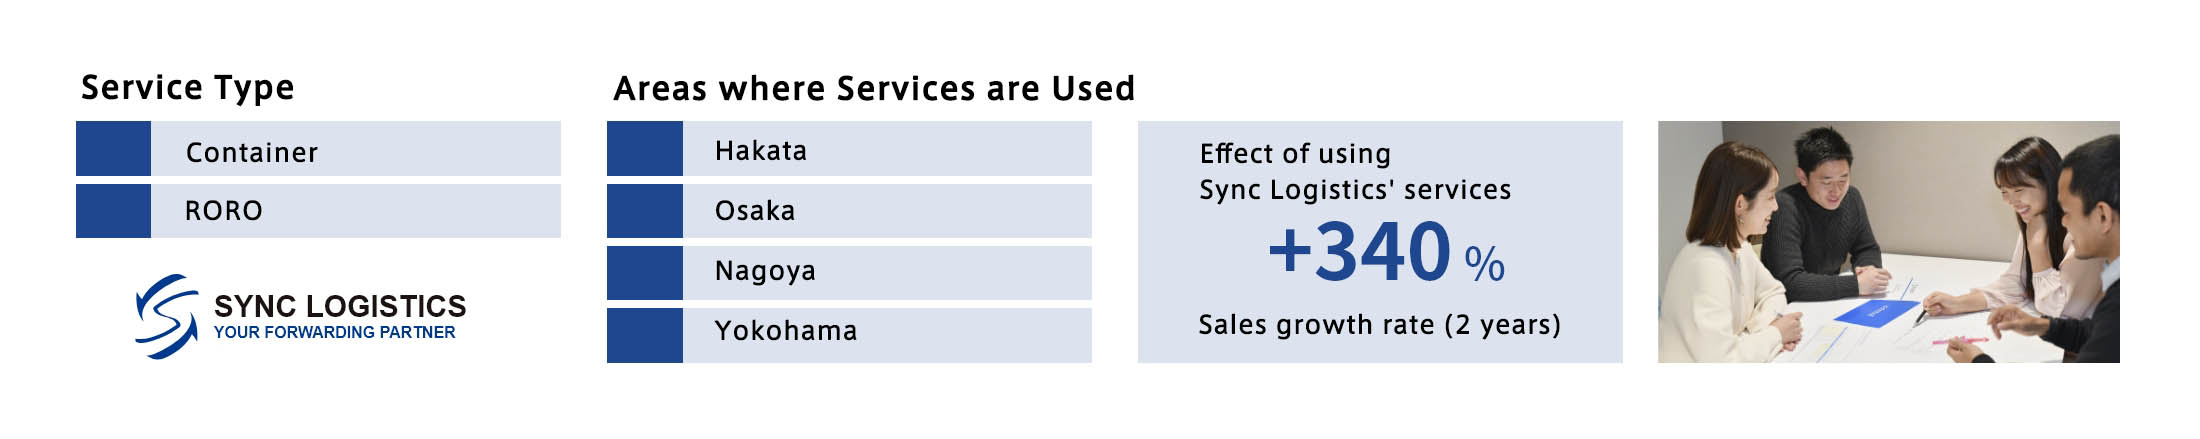 Service Type Areas where Services are Used